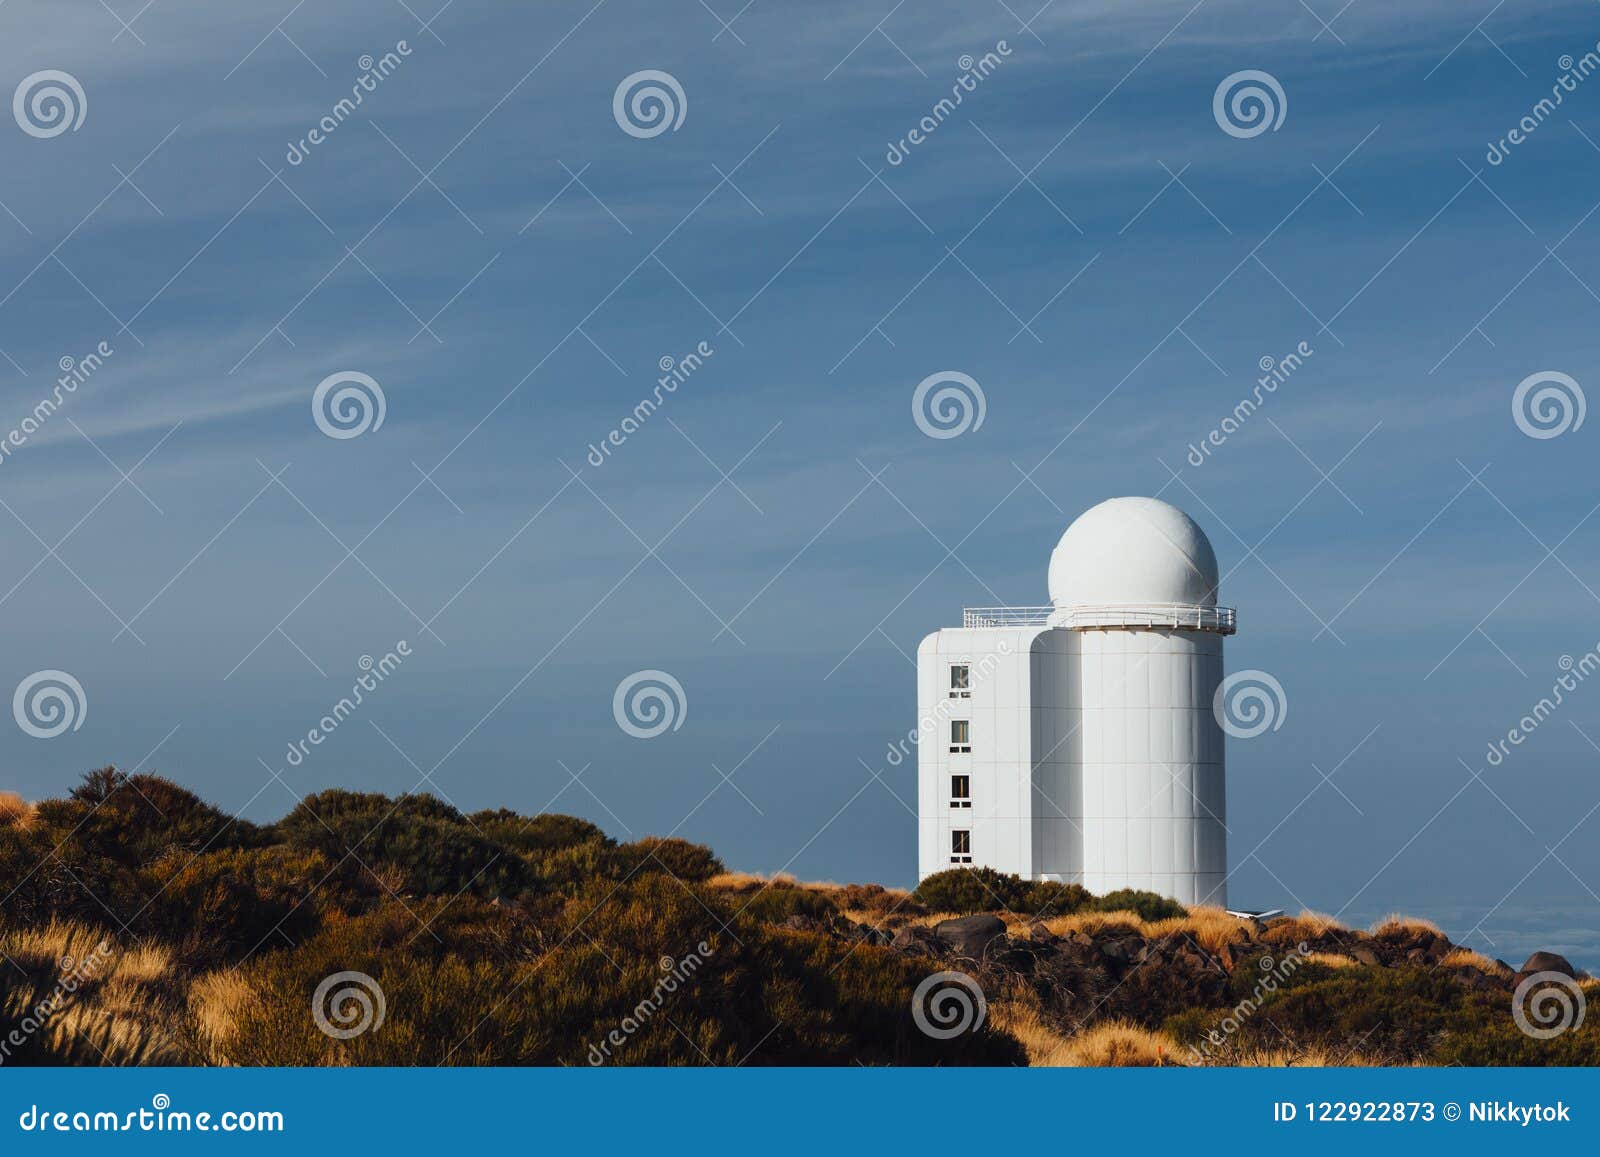 teide observatory astronomical telescopes in tenerife